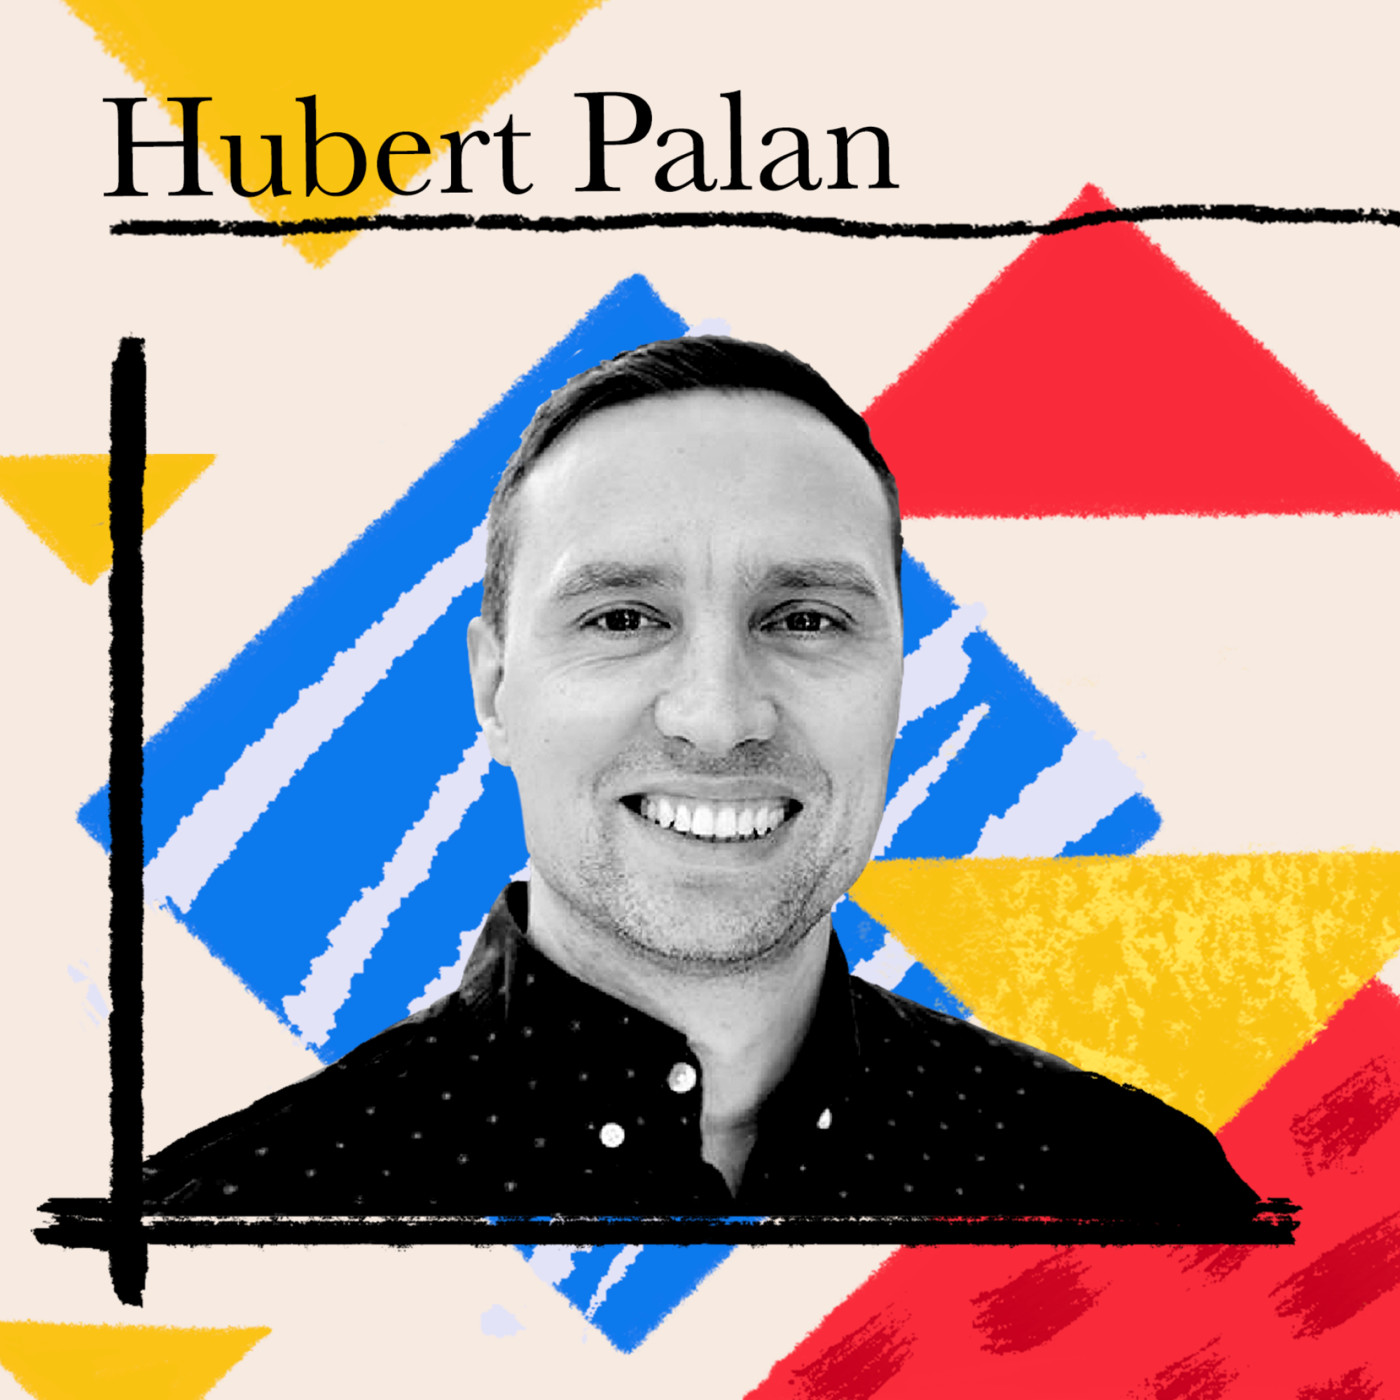 Productboard founder and CEO Hubert Palan on mastering product strategy